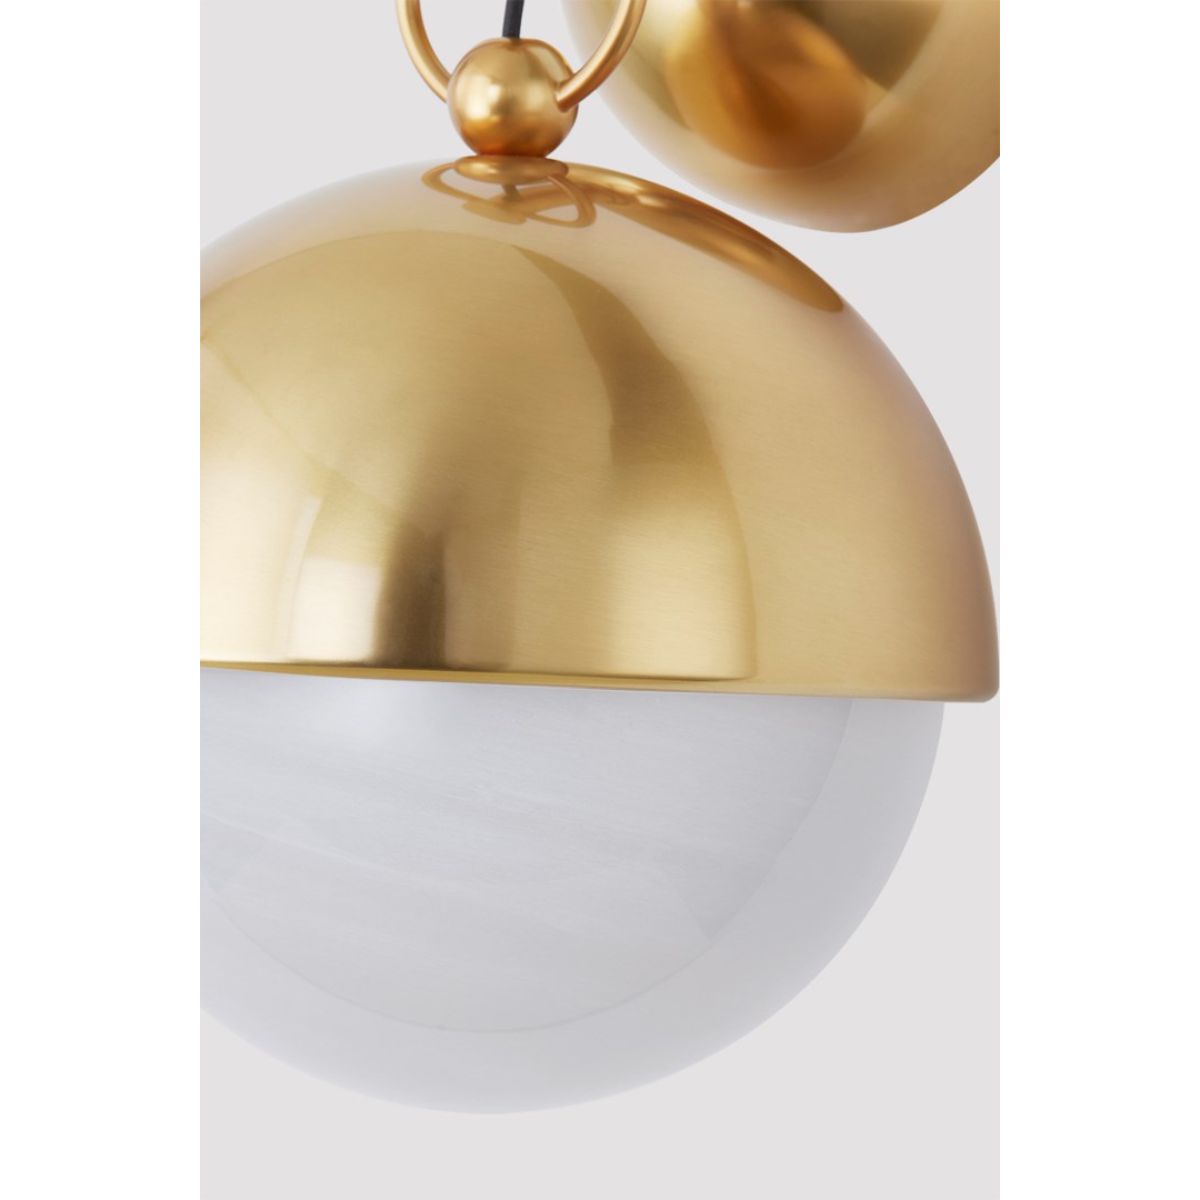 Althea 14 in. Wall Sconce vintage polished brass Finish